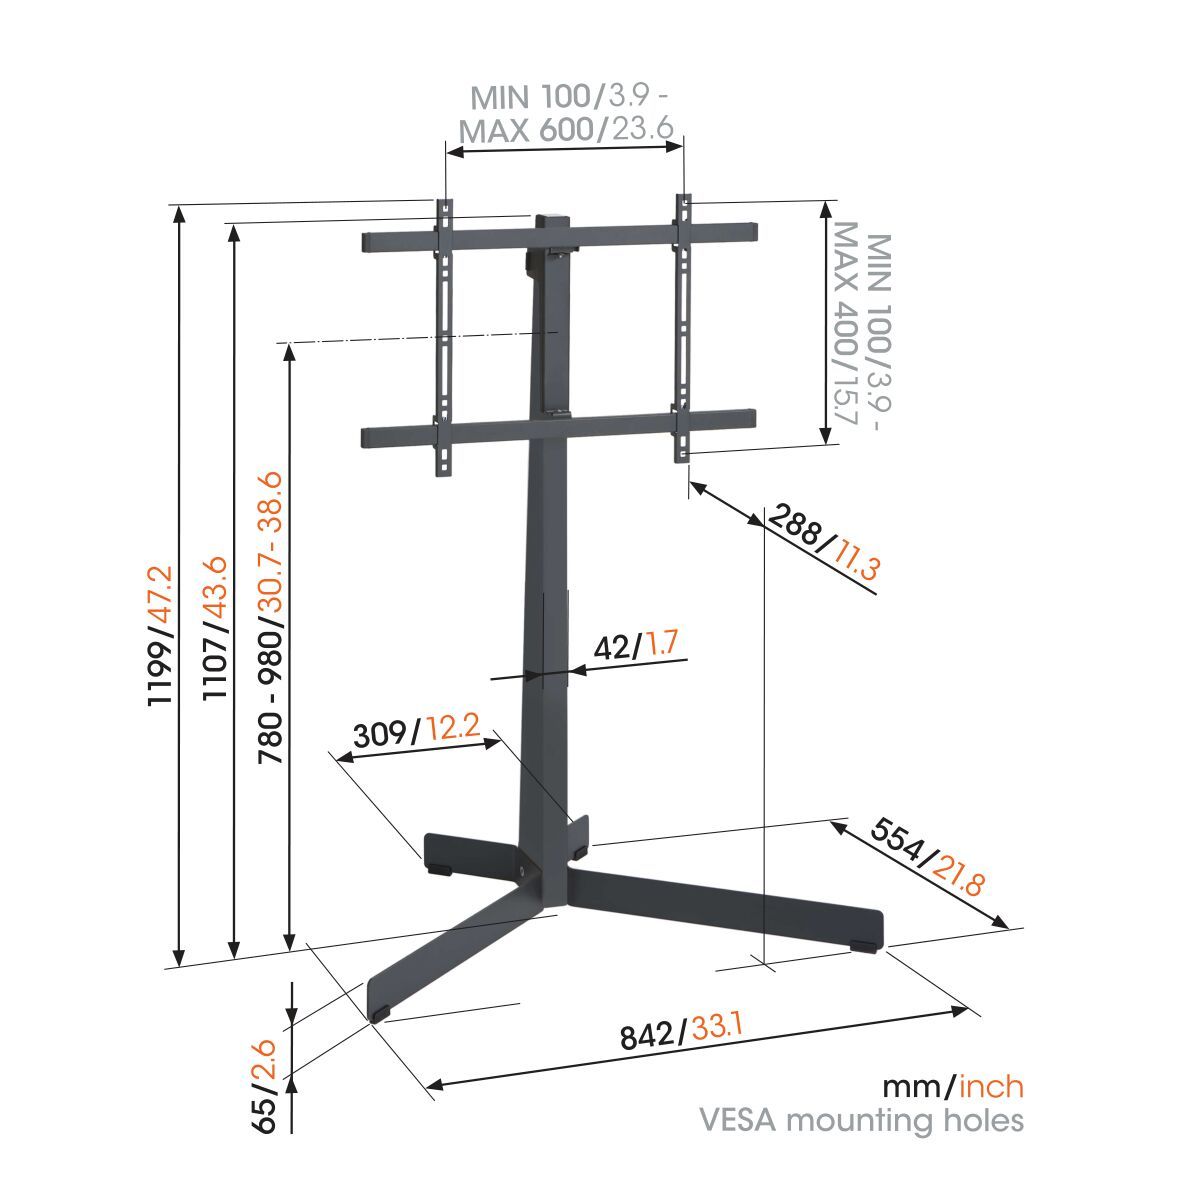 Vogel's TVS 3690 TV Floor Stand (black) - Suitable for 40 up to 77 inch TVs up to 50 kg - Dimensions